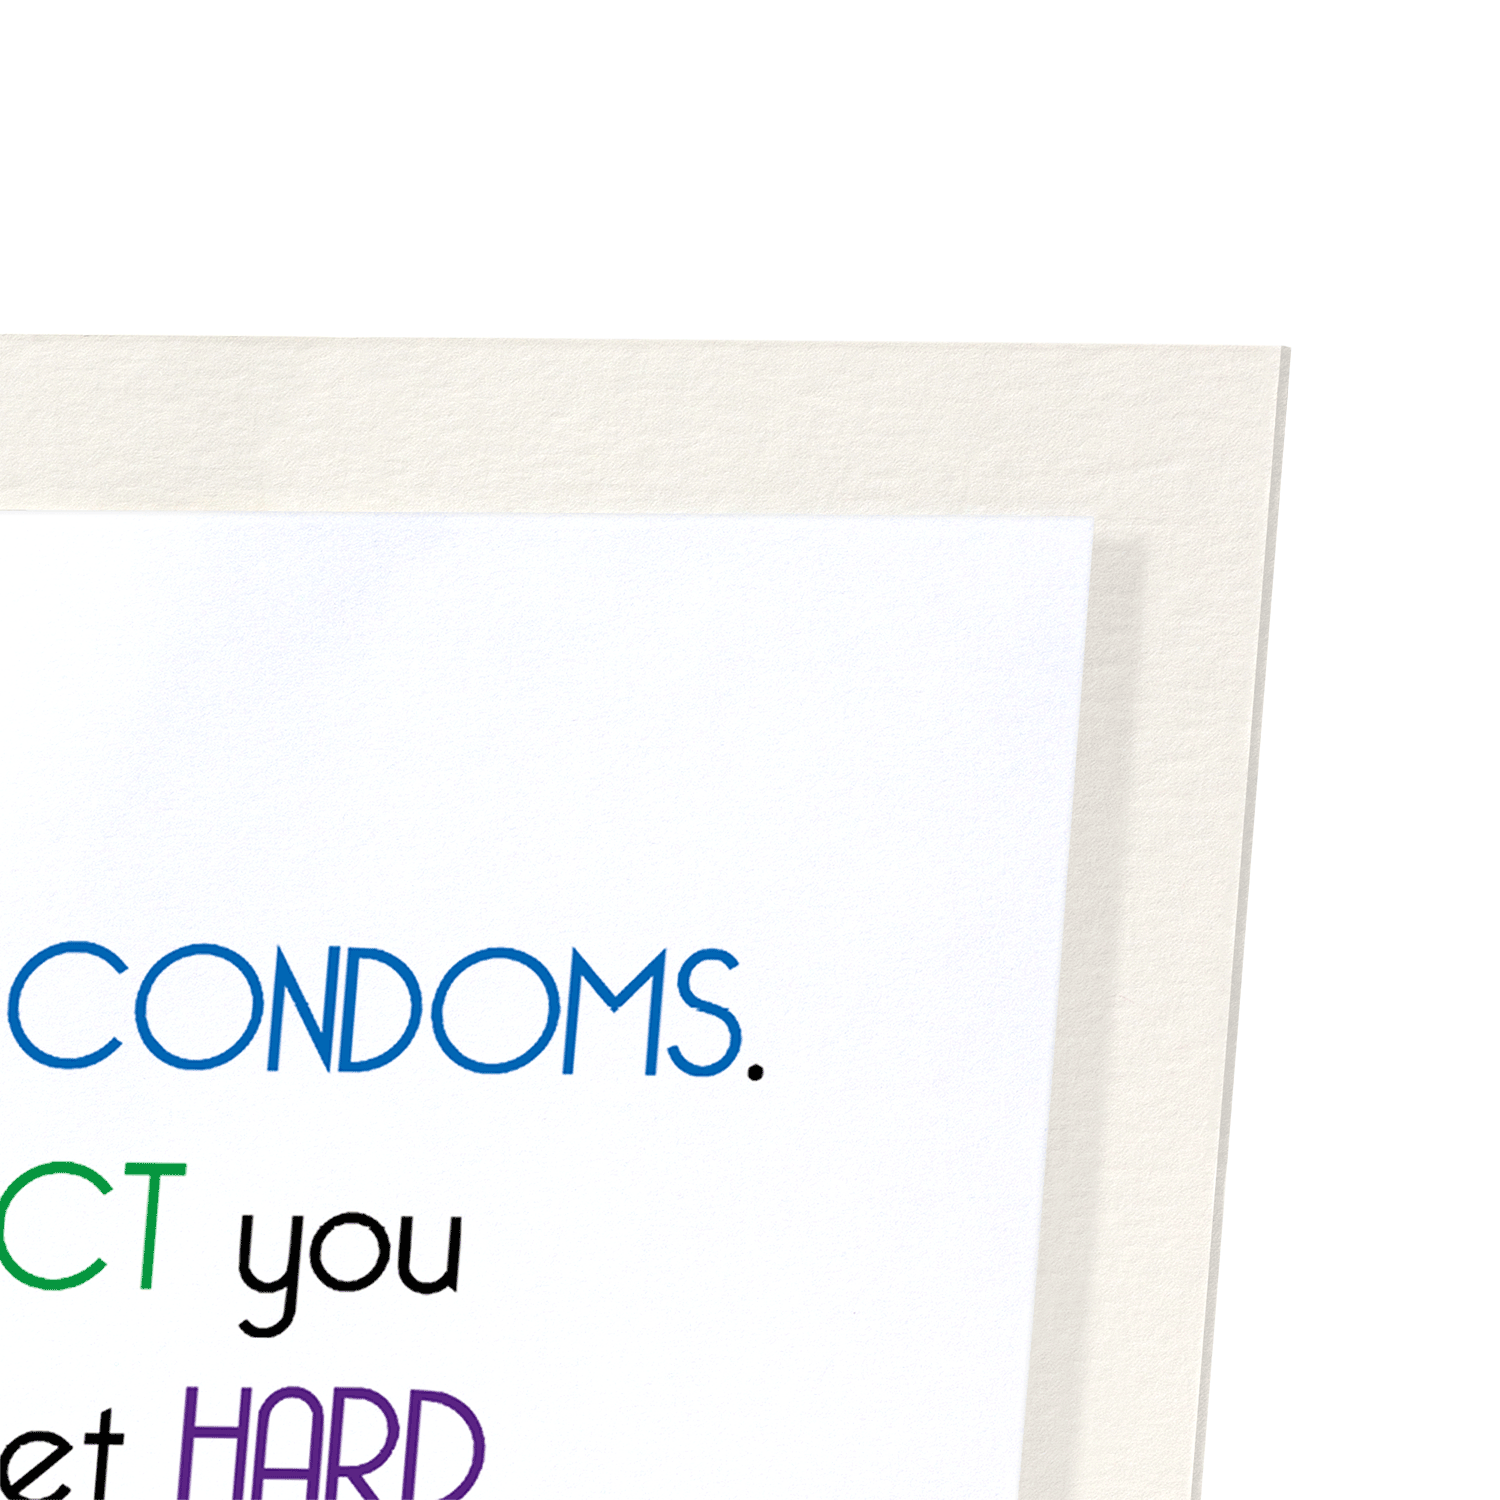 FRIENDS AND CONDOMS: Funny Animal Art print